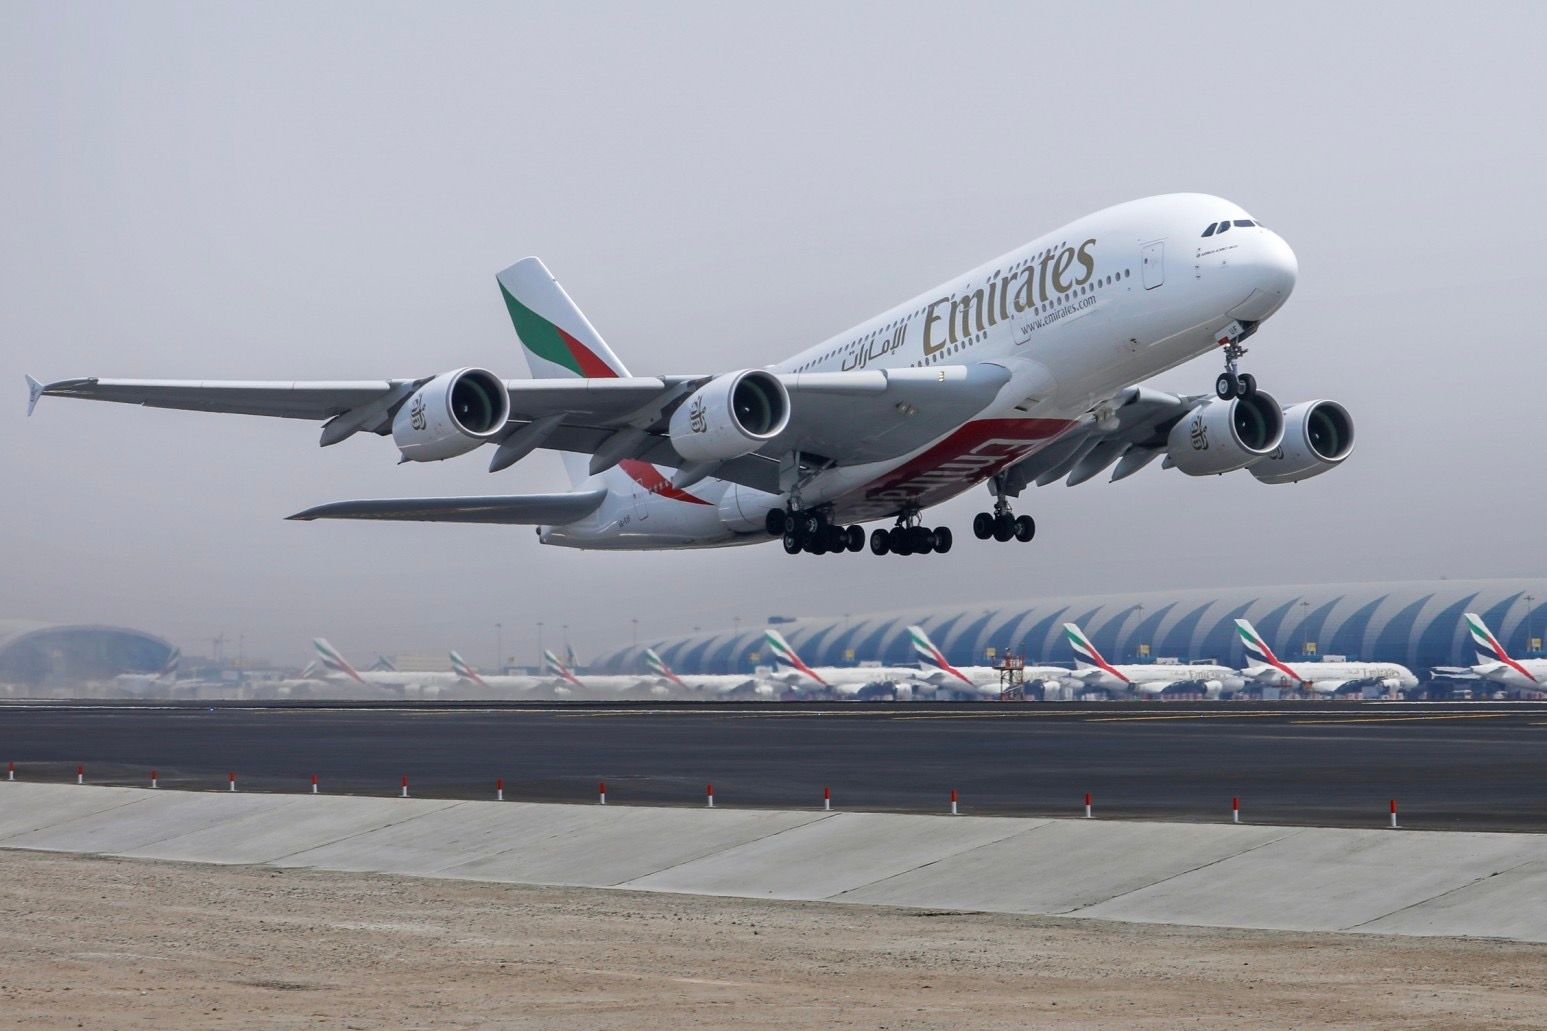 An Emirates Airbus A380 taking off from Dubai International Airport.